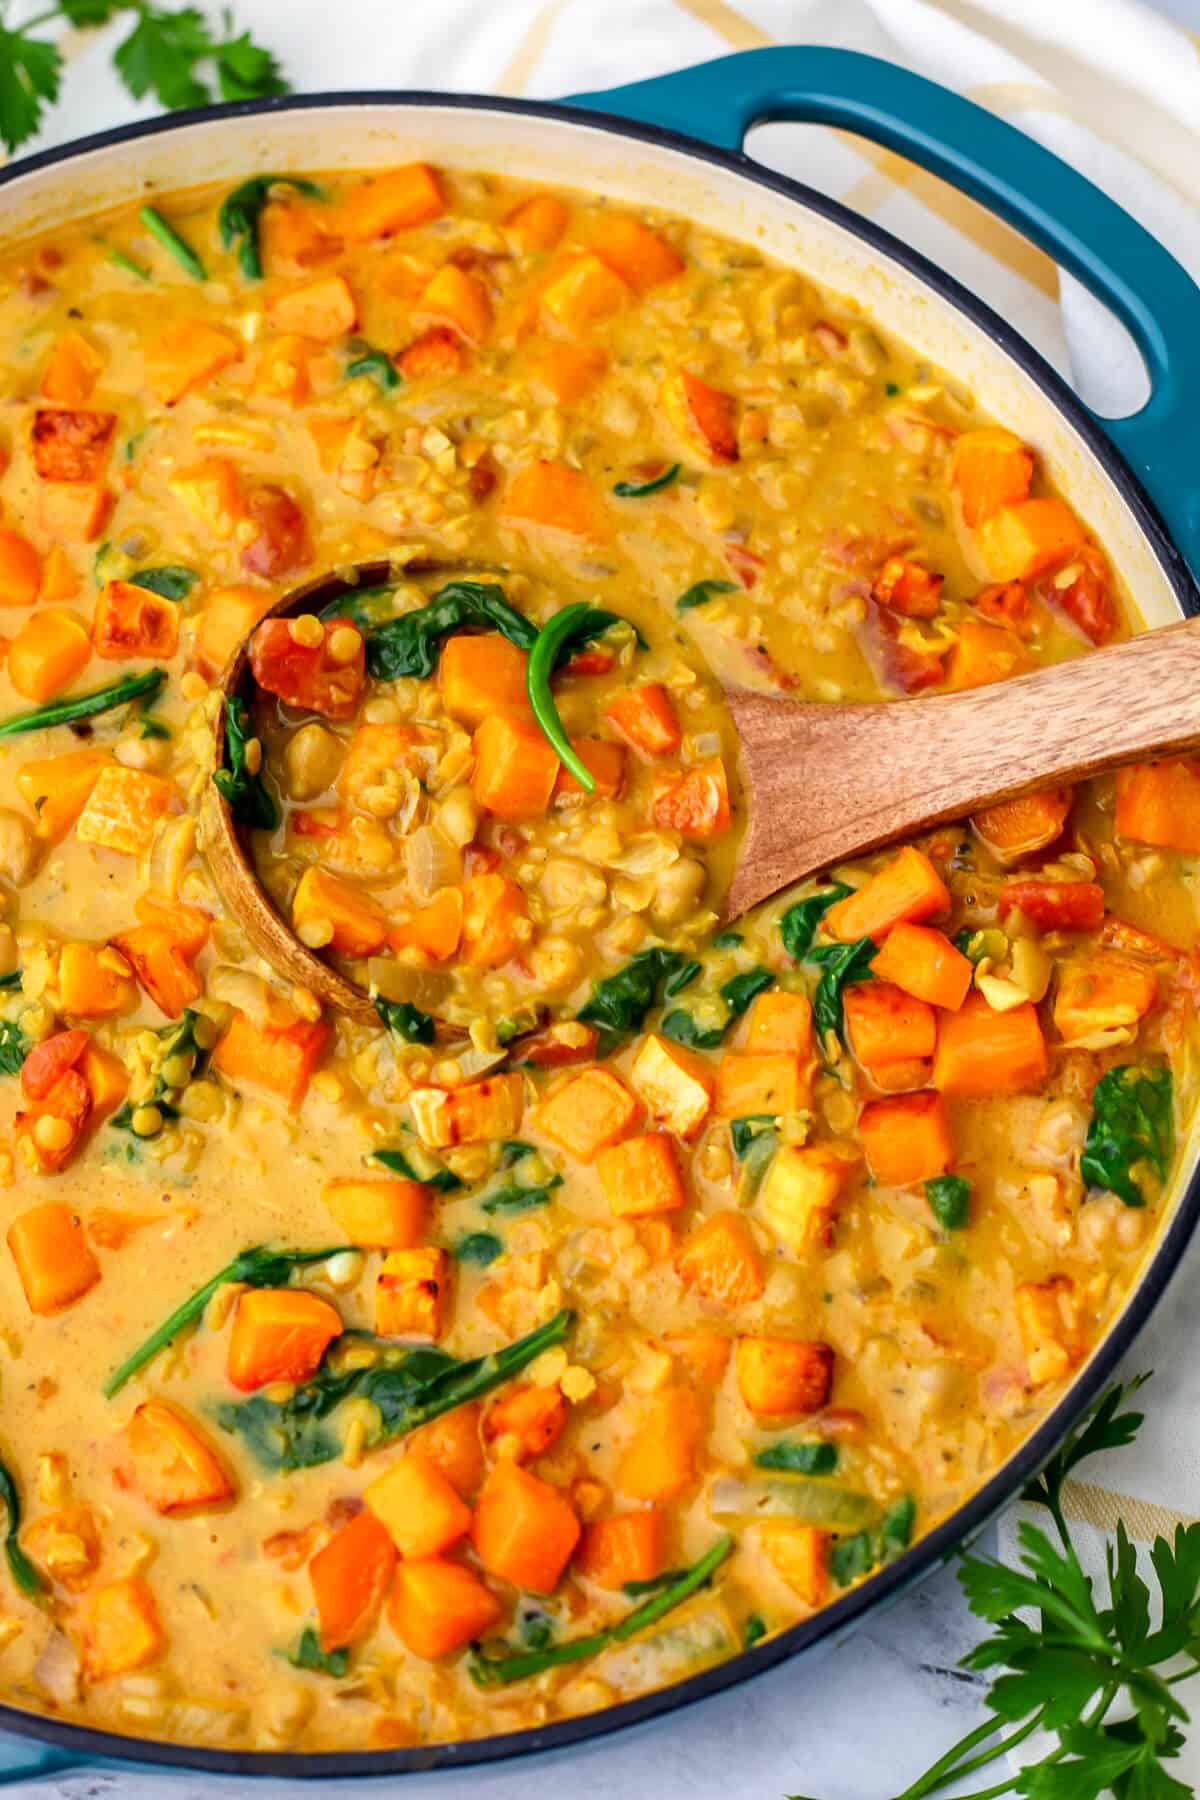 A large blue skillet full of Butternut squash and chickpea curry with red lentils and spinach with a wooden ladle in it.